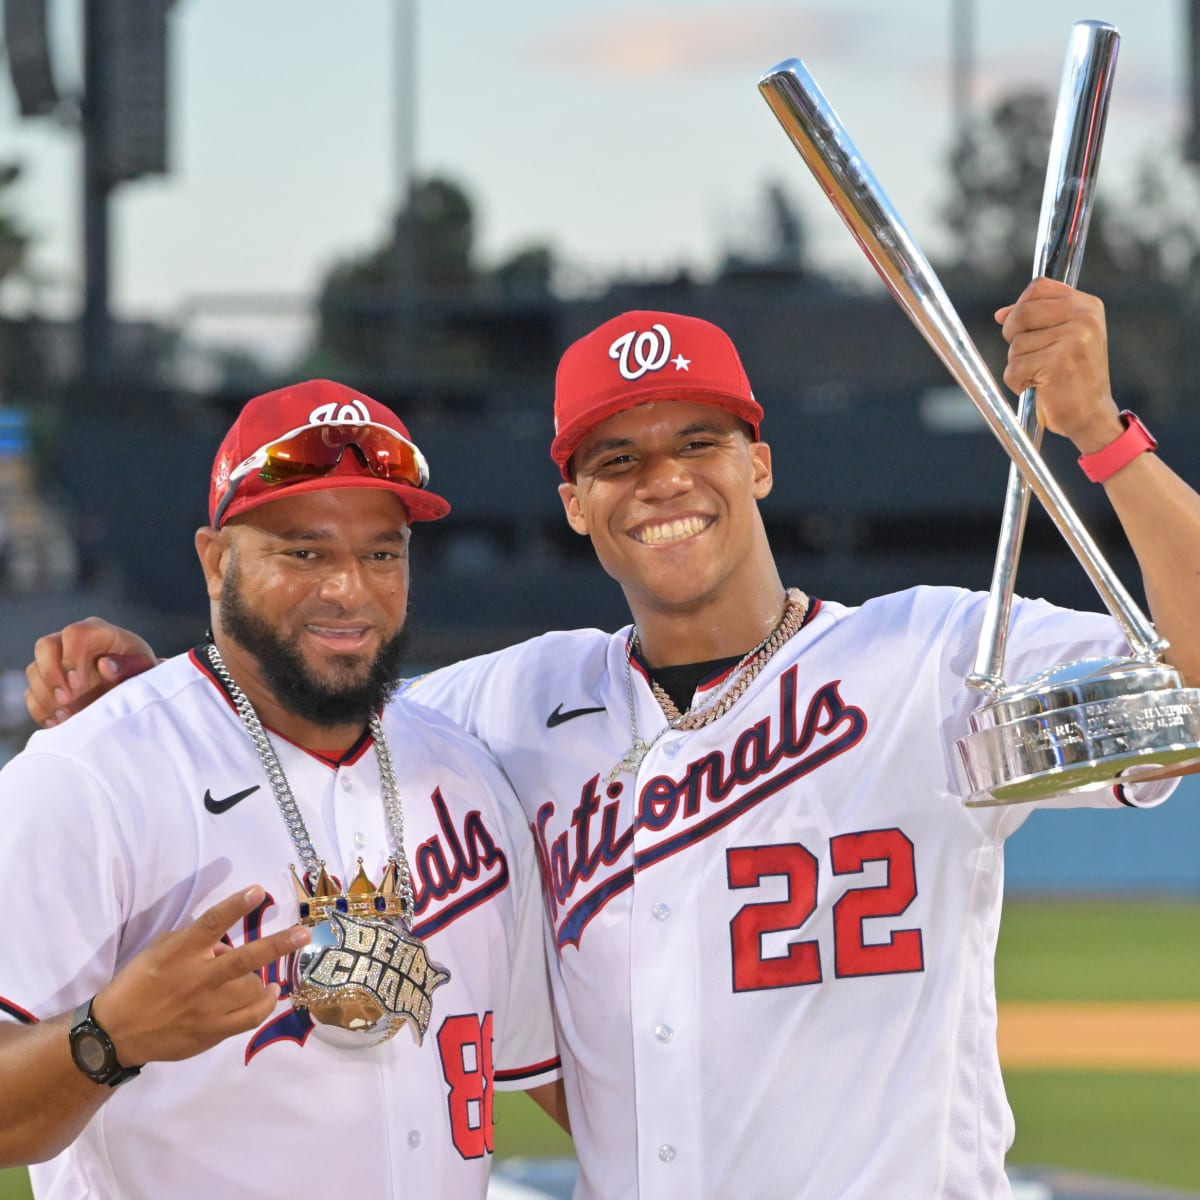 MLB News: Home Run Derby Record: Who has the most home runs in